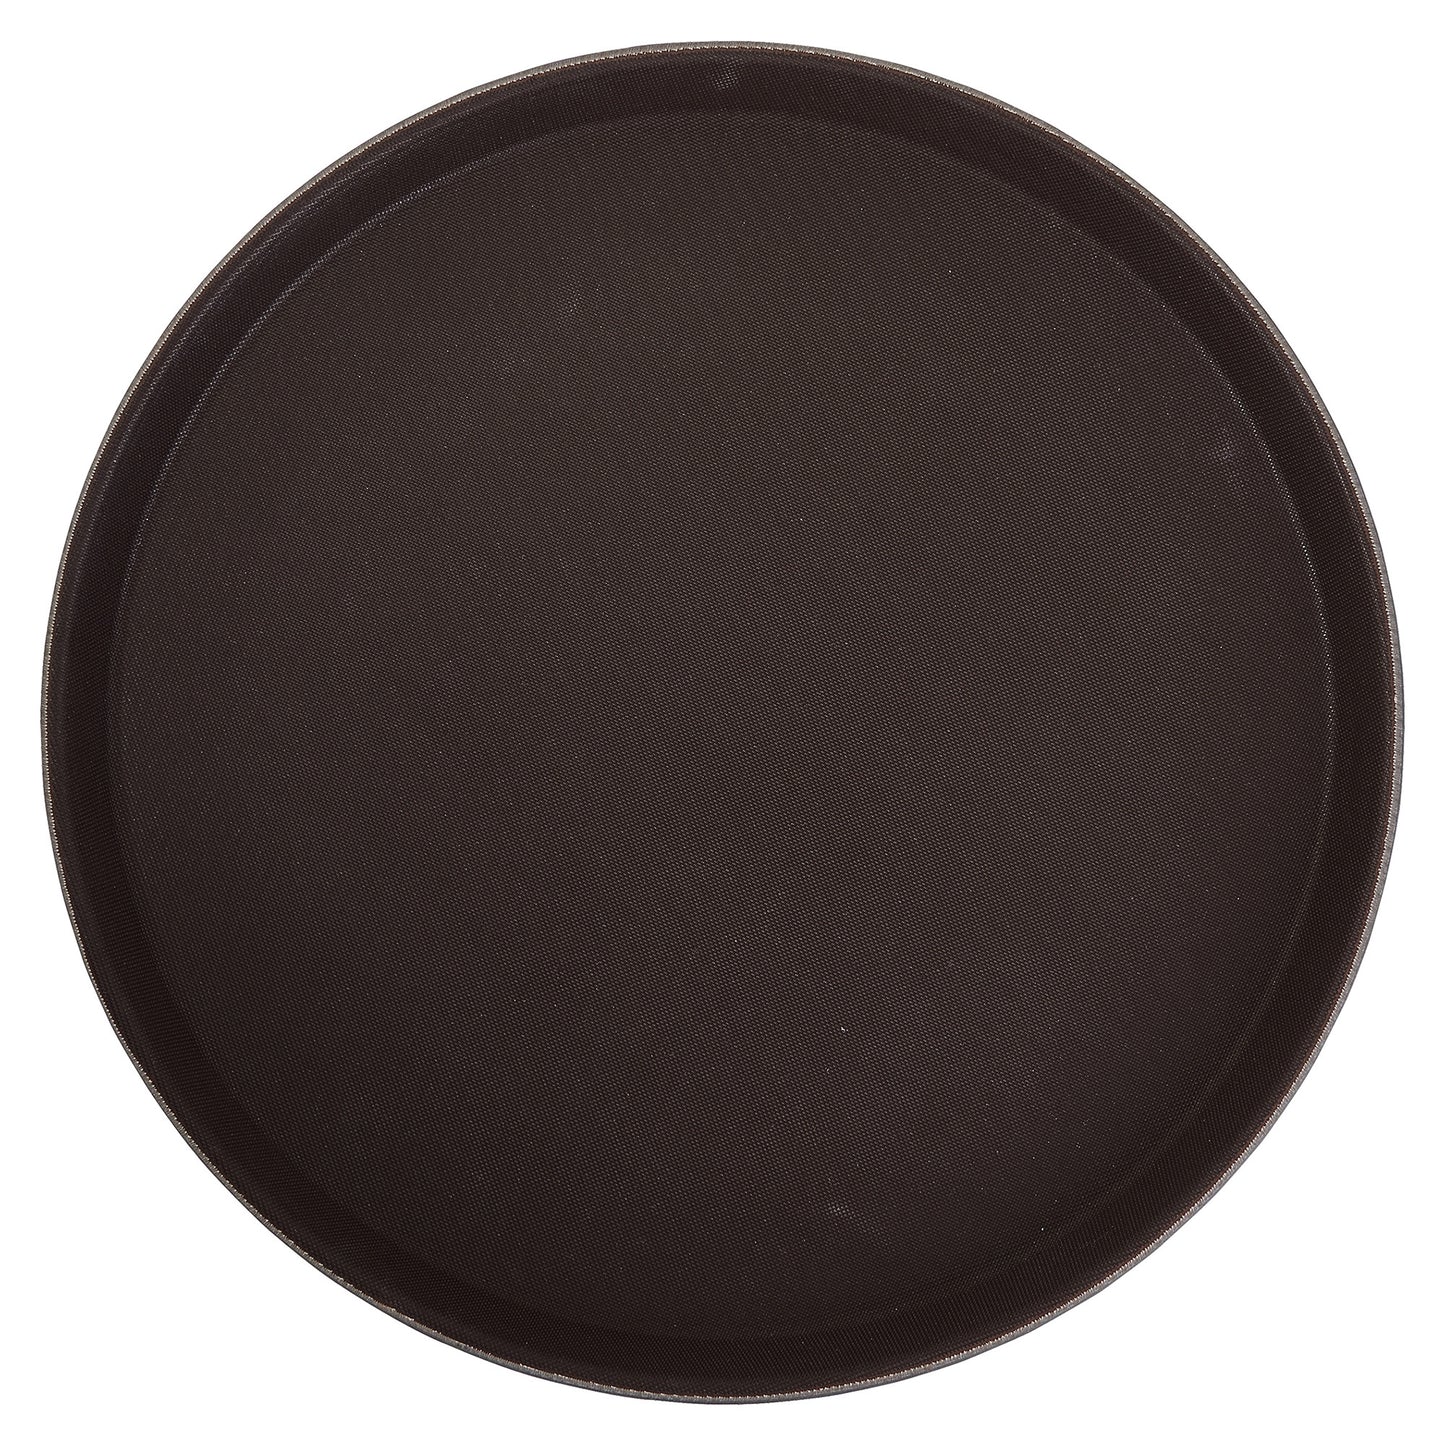 Easy-Hold 16" Round Rubber-Lined Plastic Tray